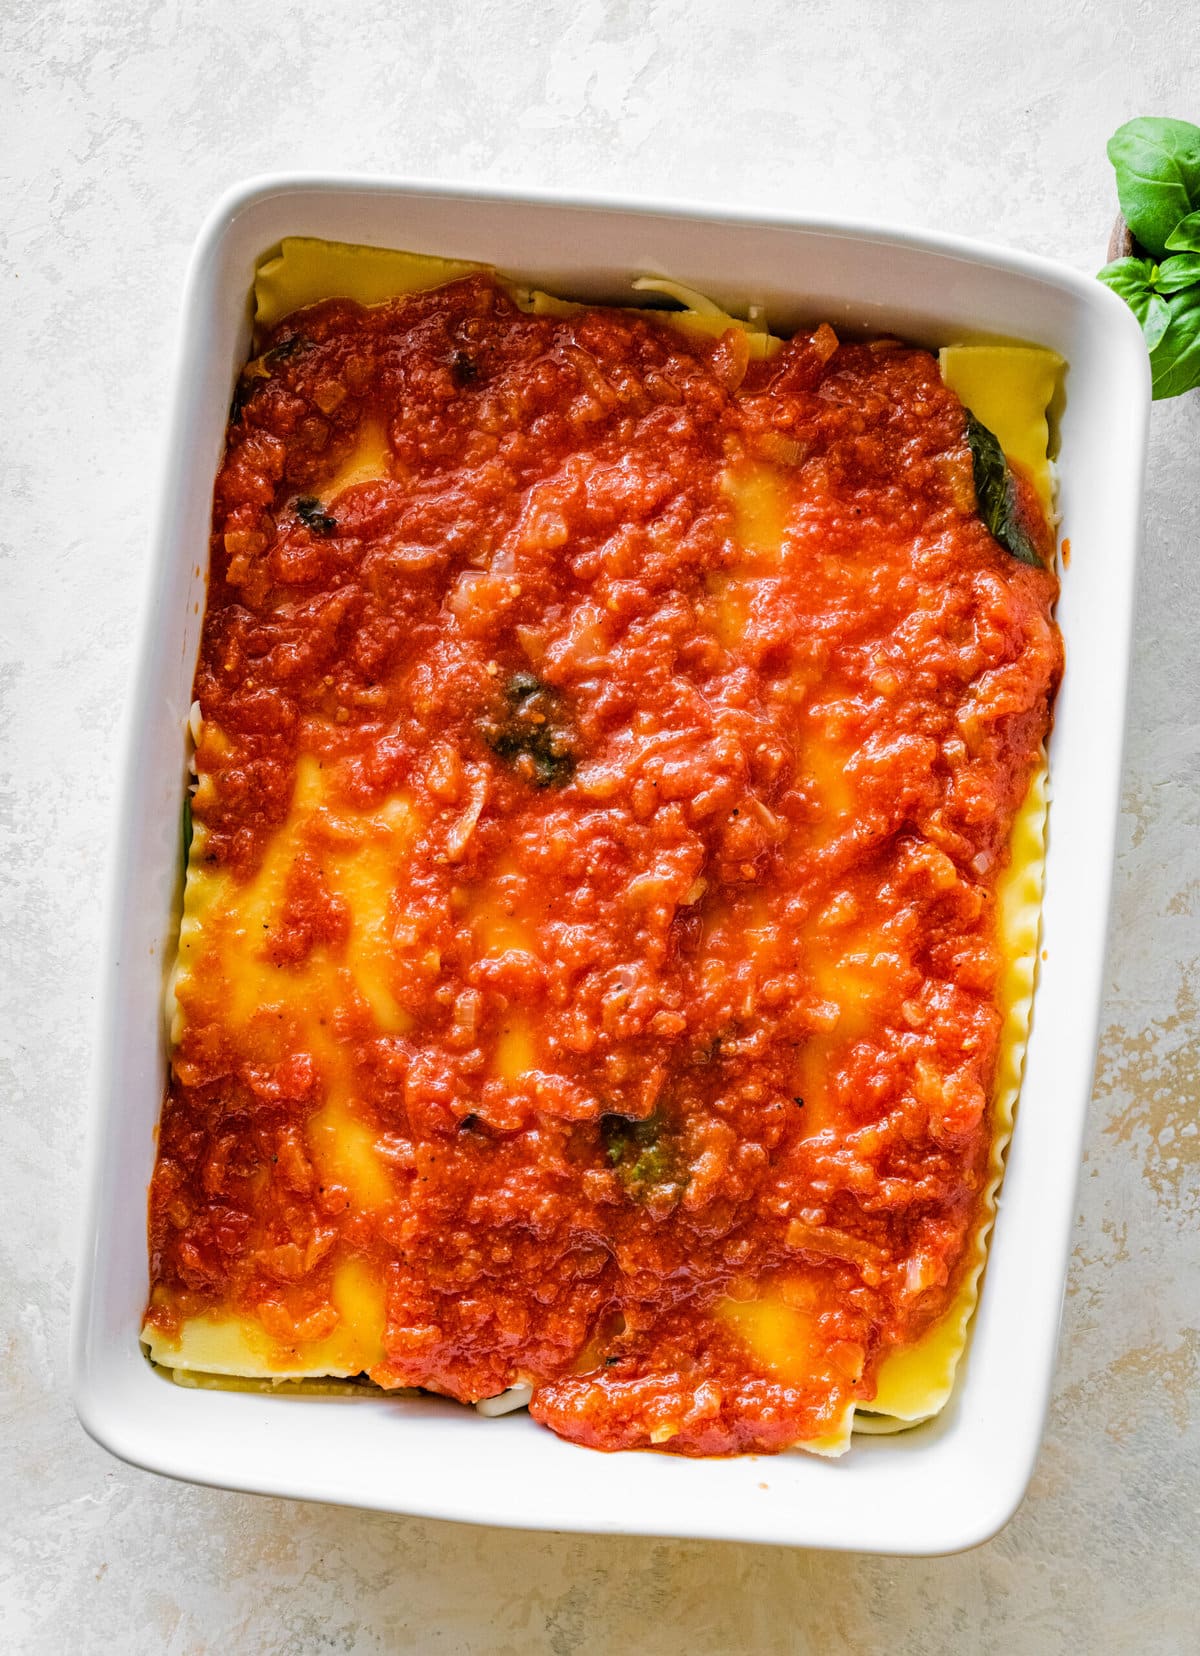 How to make Easy Mediterranean Lasagna Process- adding. more sauce on top of the layers of lasagna.